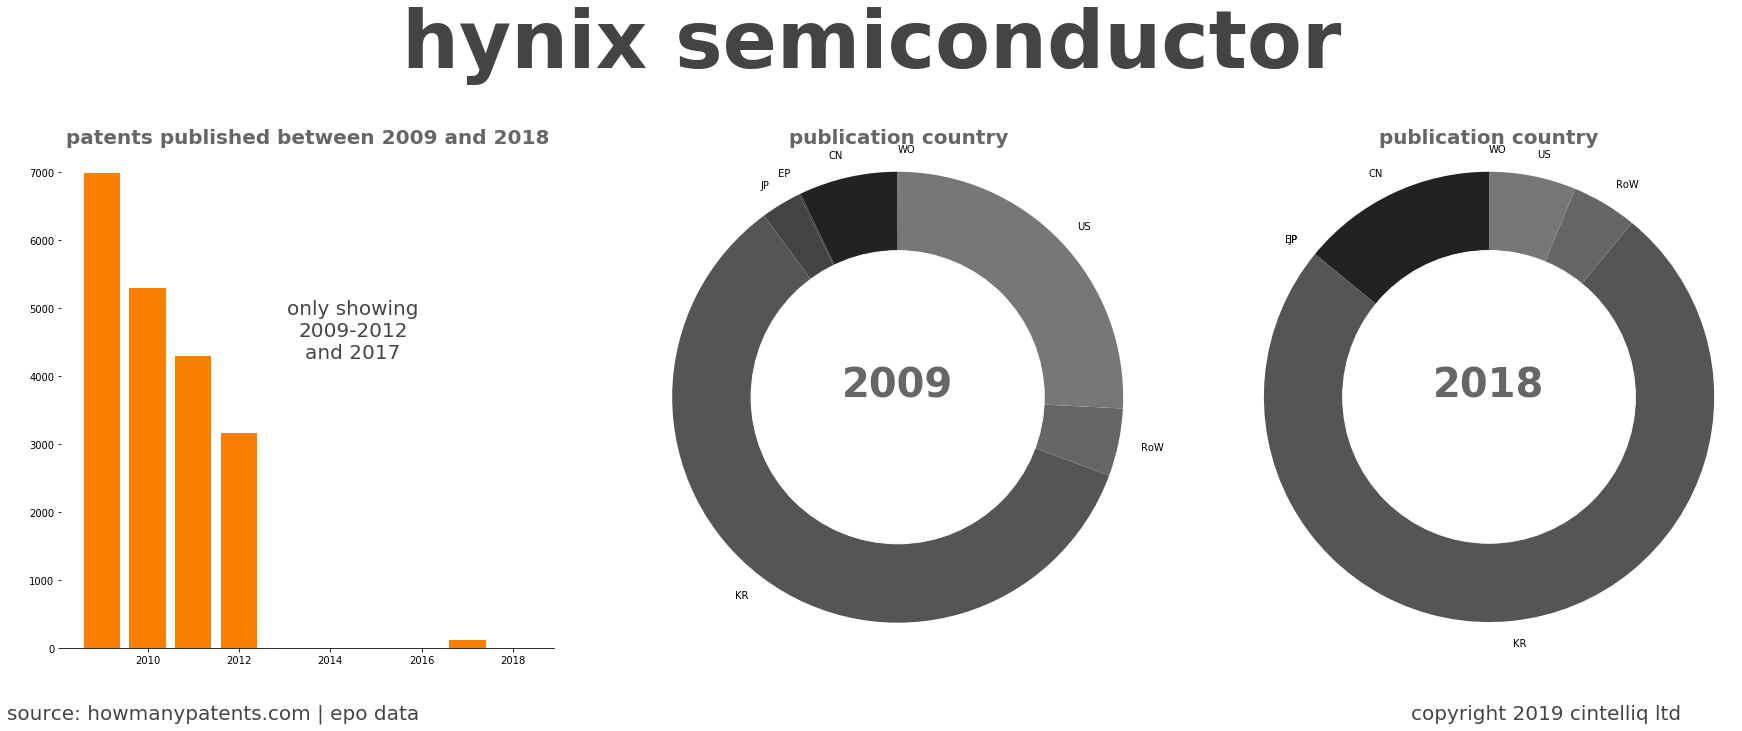 summary of patents for Hynix Semiconductor